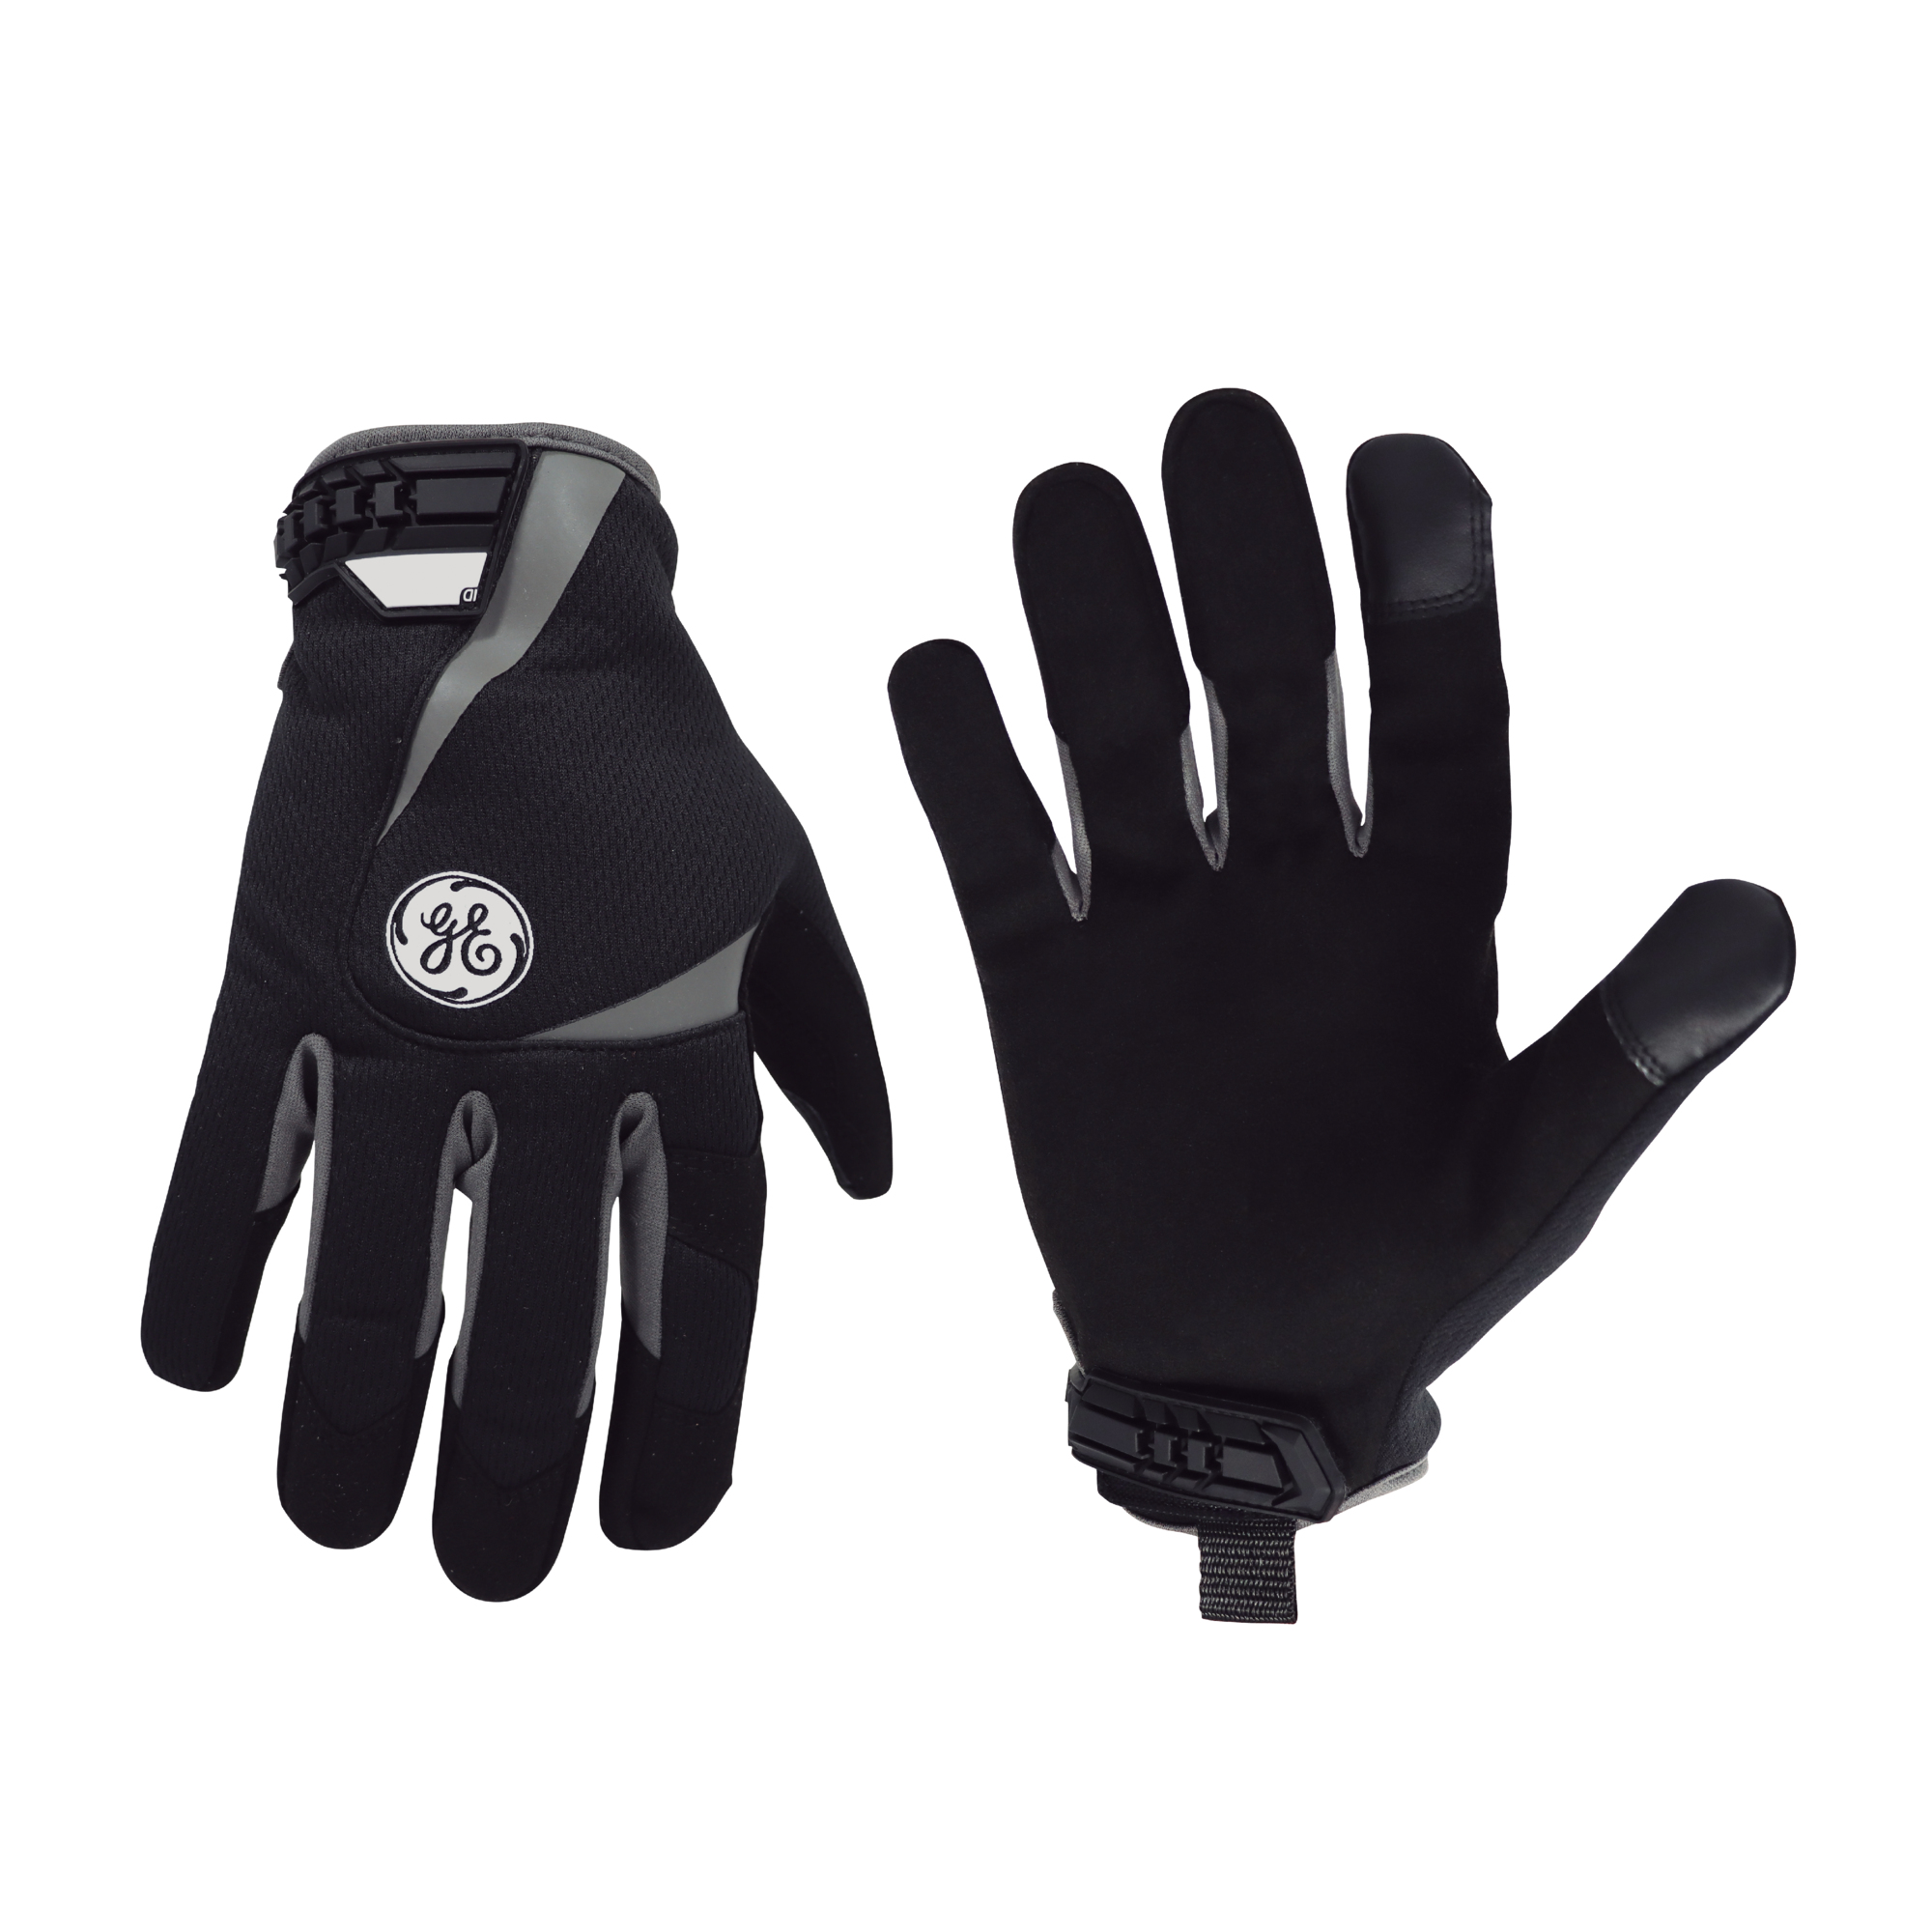 General Electric, Mechanic's Glove Black/Gray L 1 pair, Size L, Included (qty.) 1, Model GG401LC